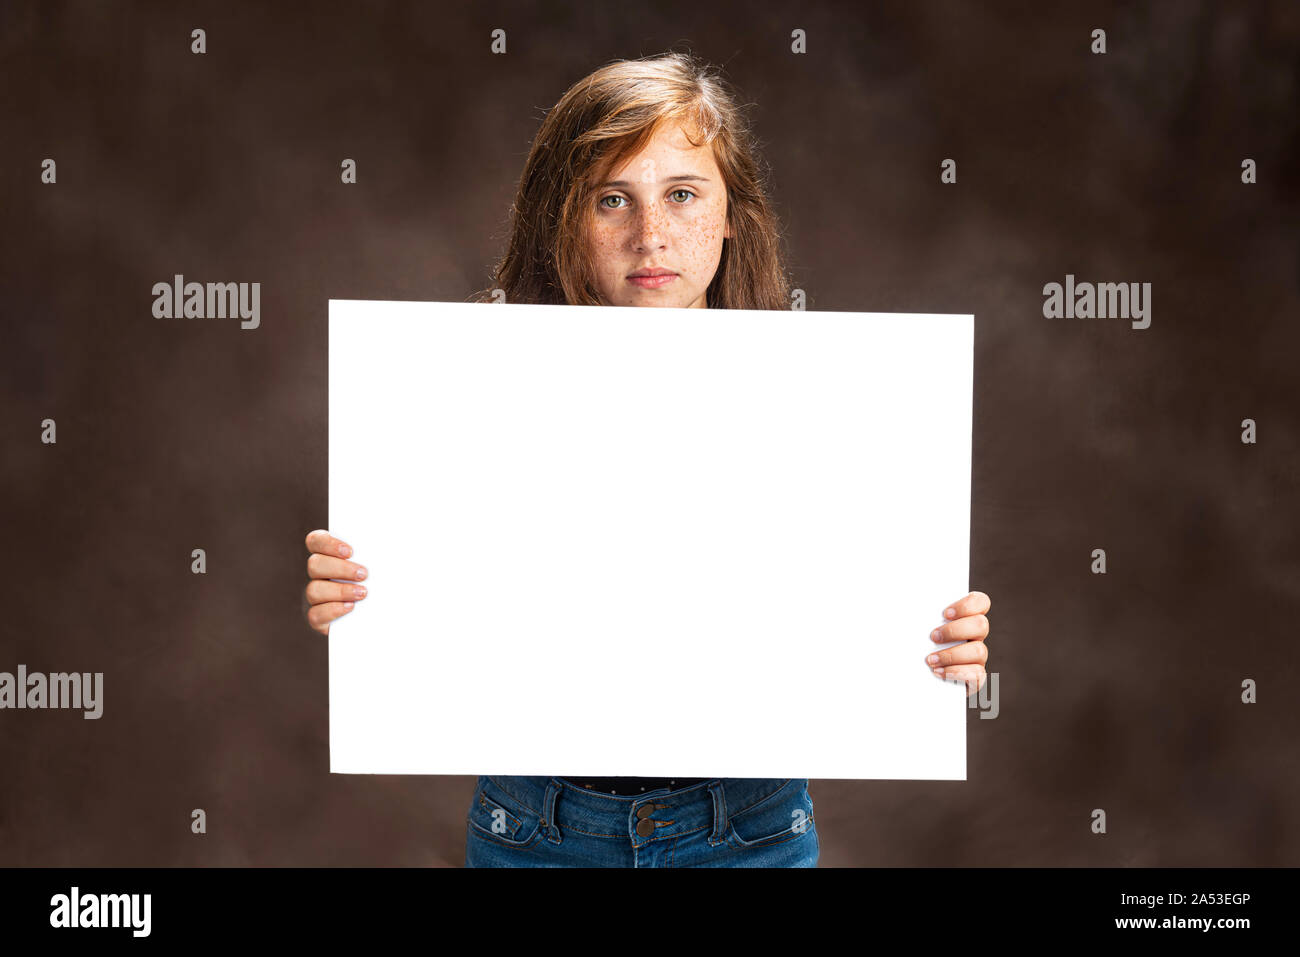 Horizontal studio shot of a pre-teen girl with beautiful eyes holding a blank white sign.  She has a serious expression on her face.  Brown background Stock Photo